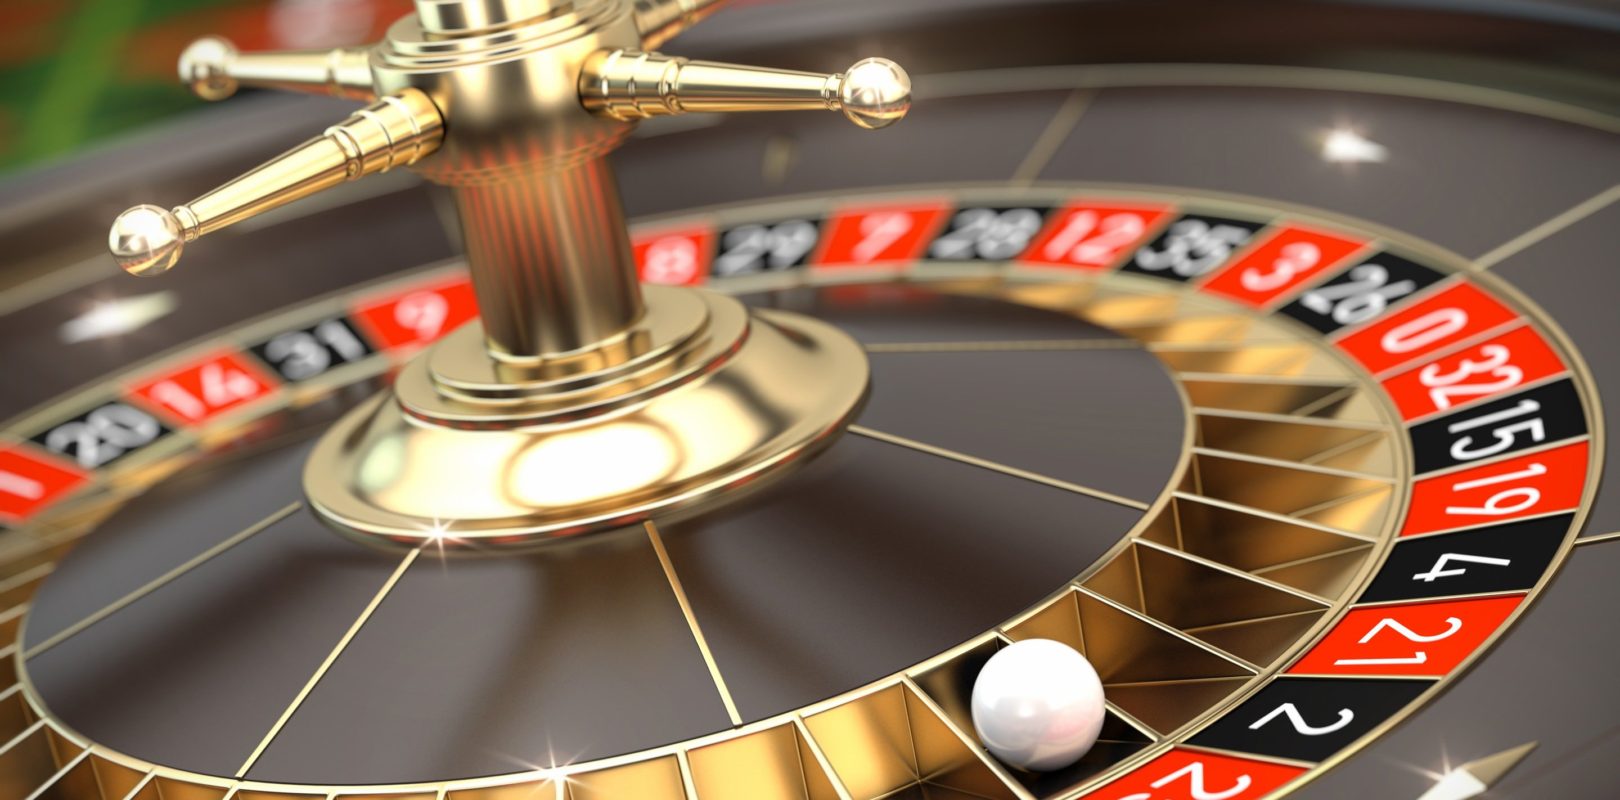 The Customs and Monopolies Agency governs all Italian legal online casinos (casino online legali)